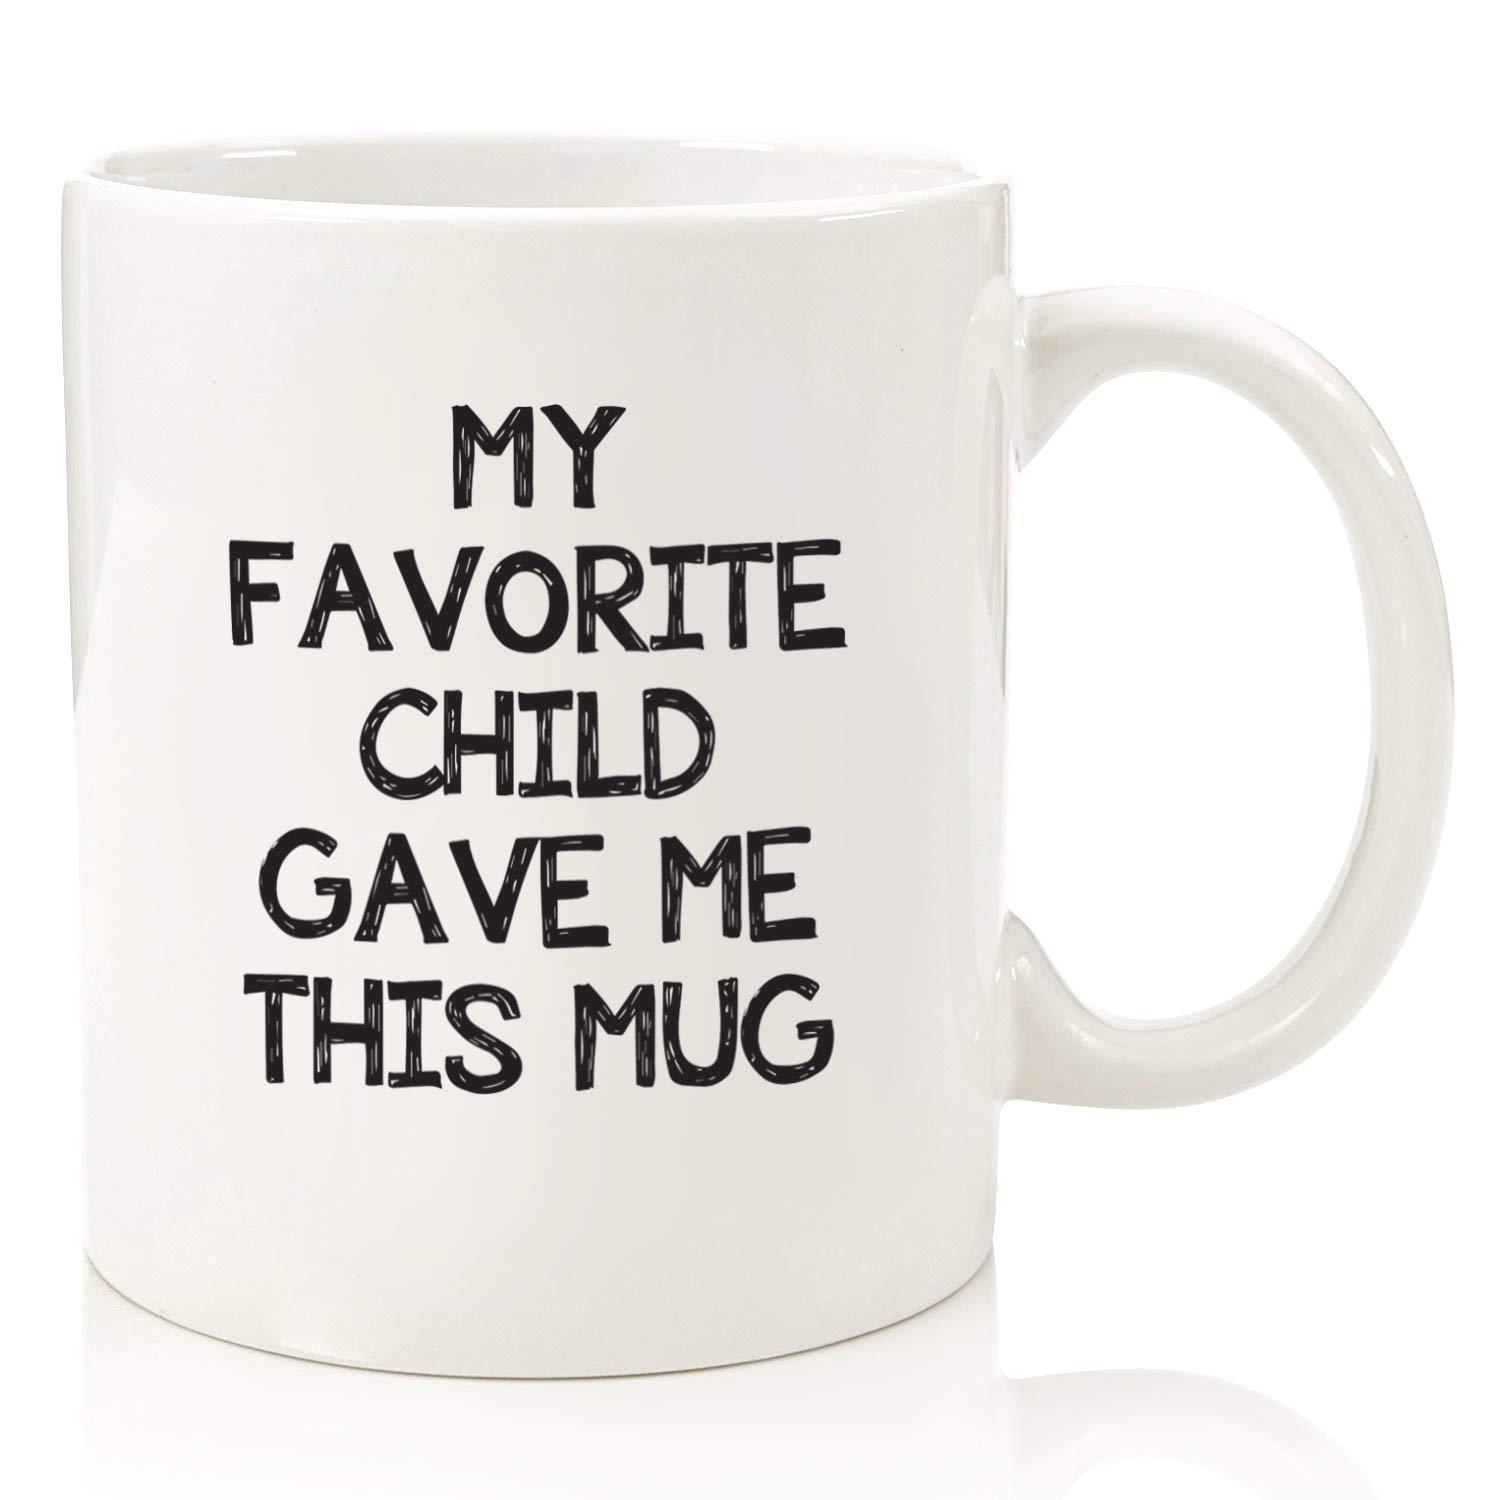 My Favorite Child Gave Me This Funny Coffee Mug - Best Mom & Dad Gifts - Gag Bday Present Idea from Daughter, Son, Kids - Novelty Birthday Gift for Dad, Mom, Parents - Fun Cup for Men, Women, Him, Her